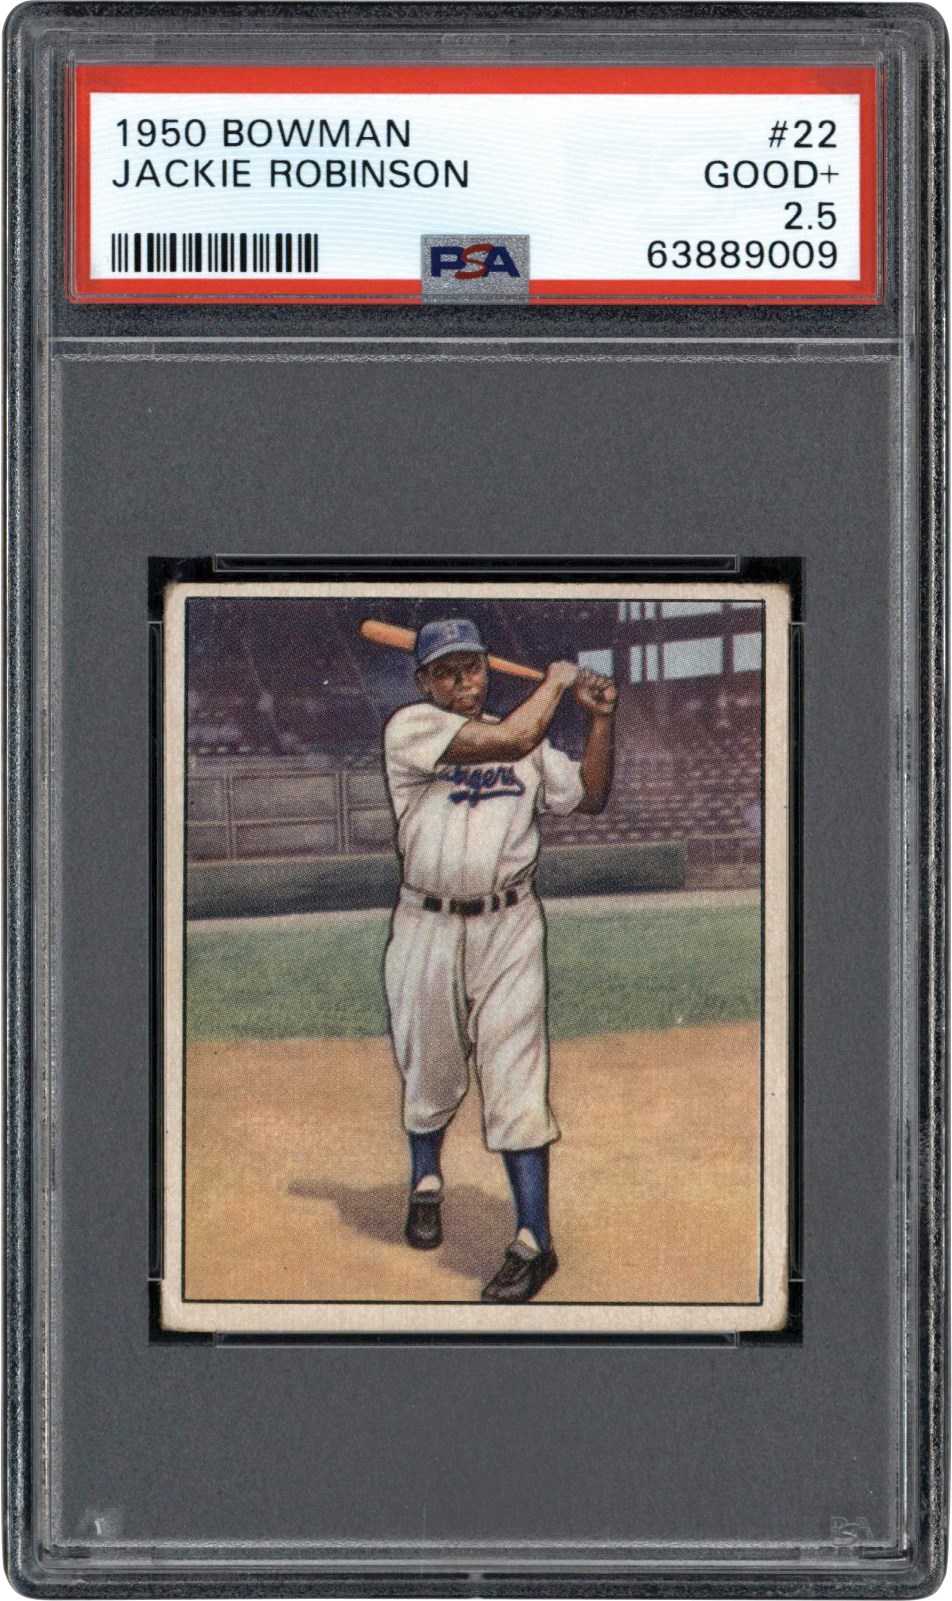 1950 Bowman #22 Jackie Robinson PSA GD+ 2.5 - Newly Discovered Example